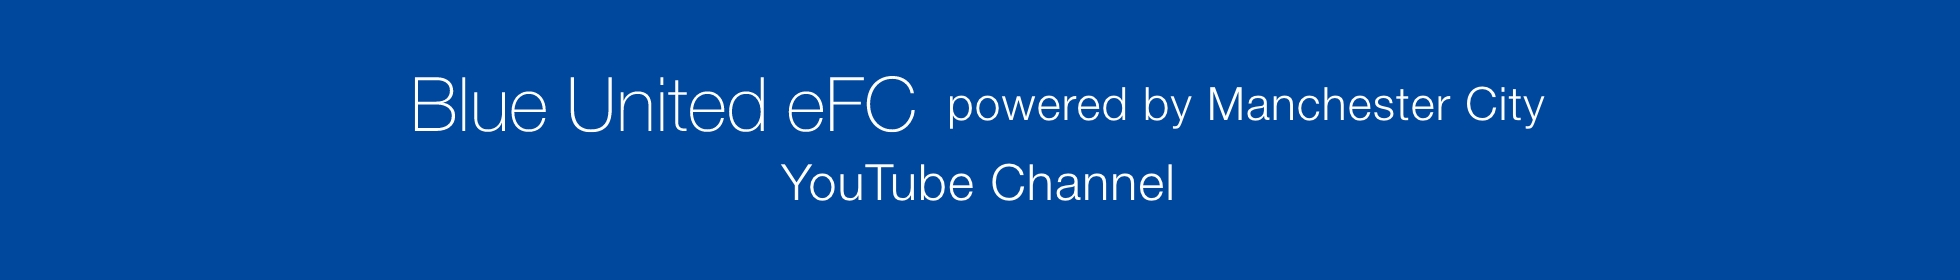 Blue United eFC powered by Manchester City YouTube Channel